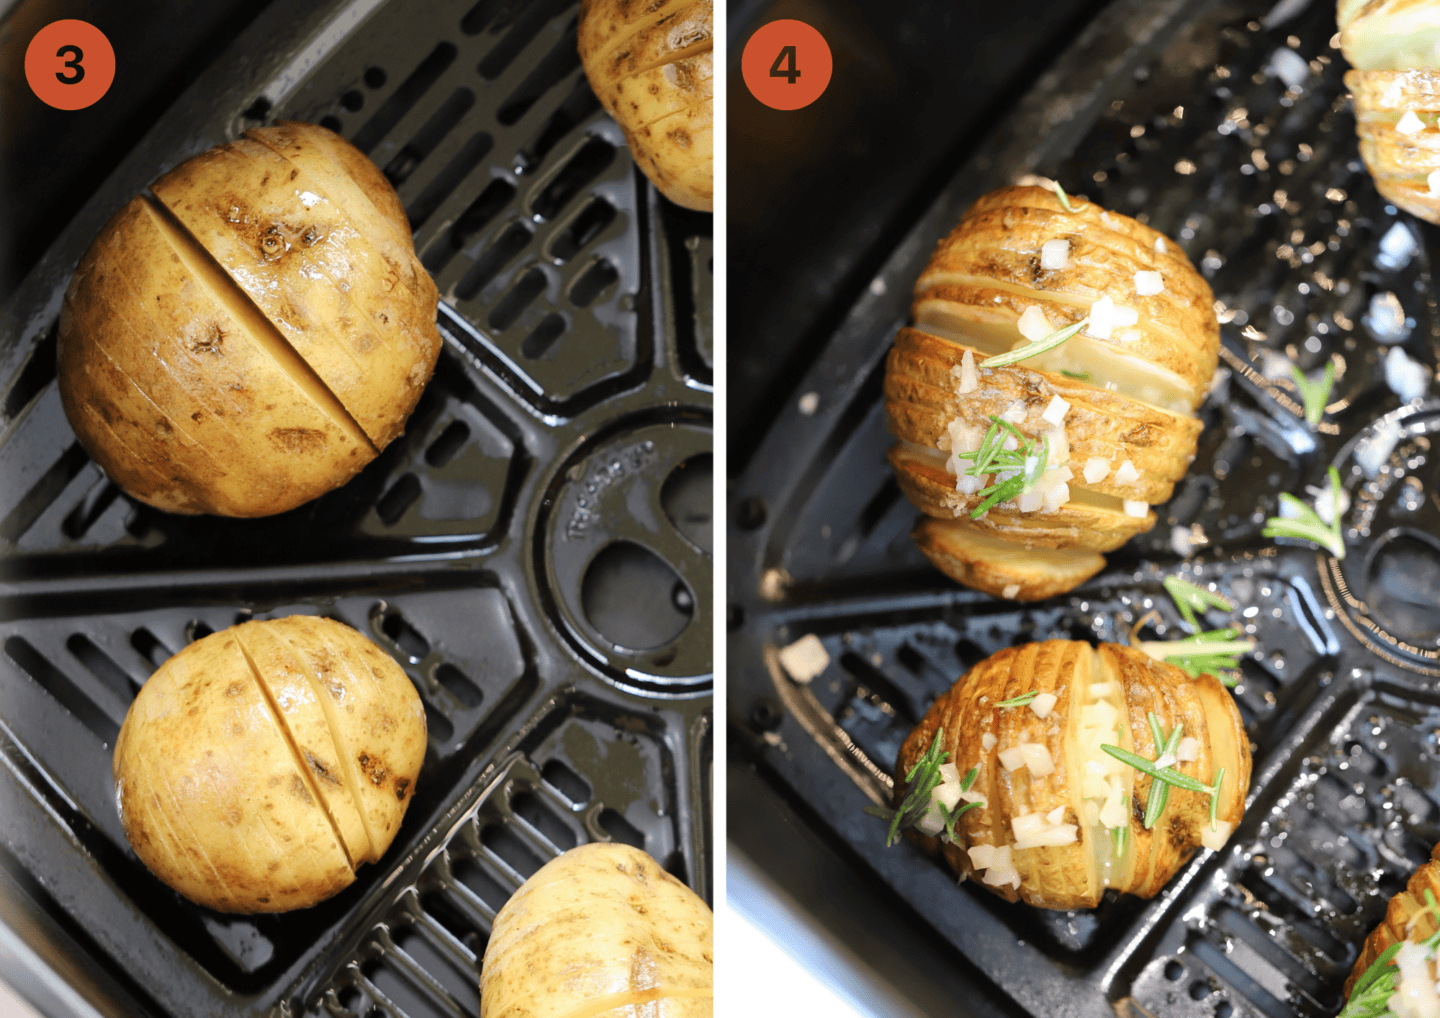 The potatoes in the air fryer before and after adding garlic butter.